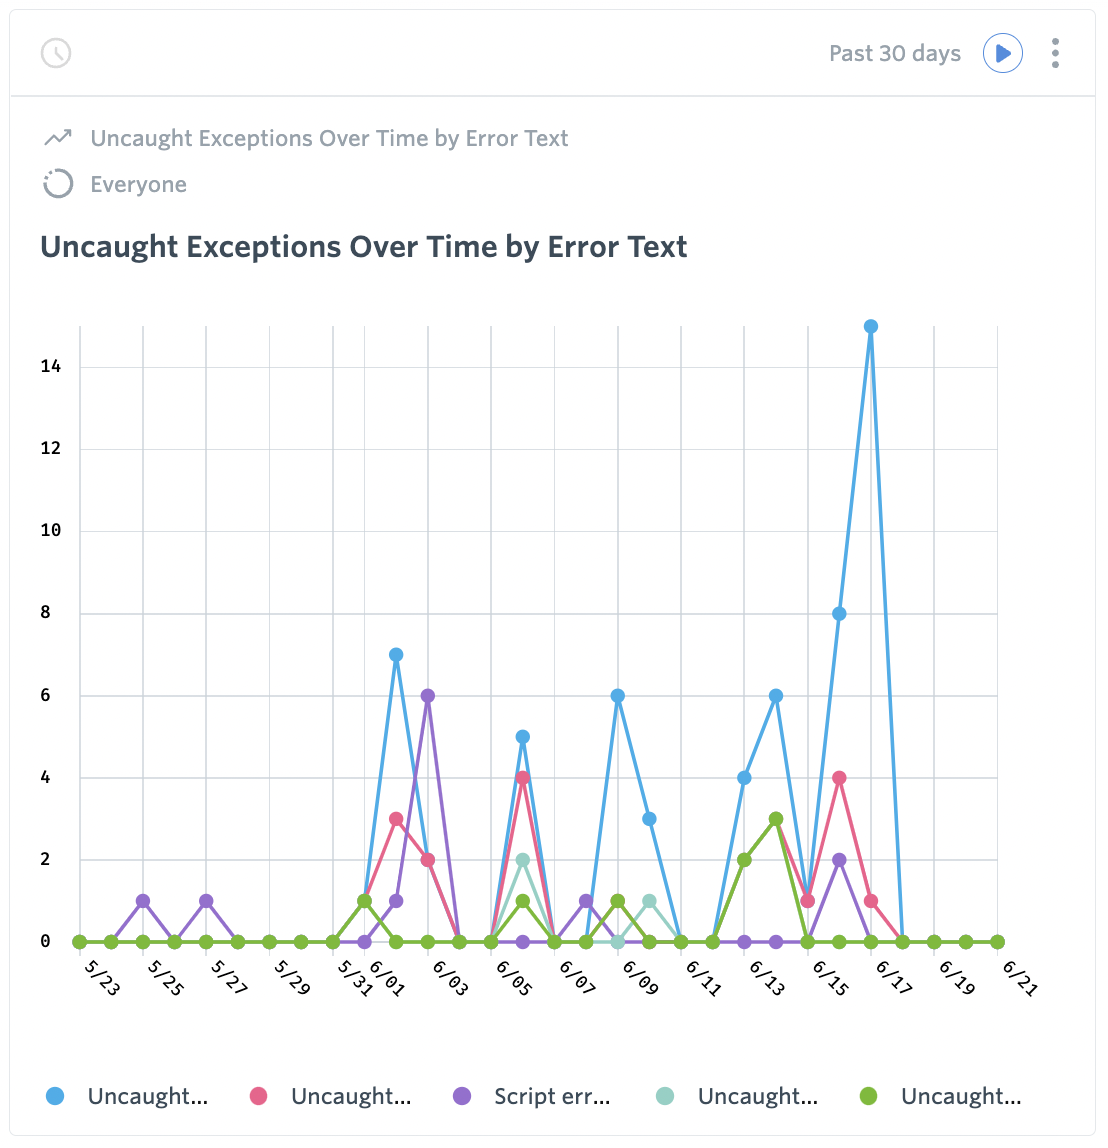 Uncaught Exceptions Over Time by Error Text